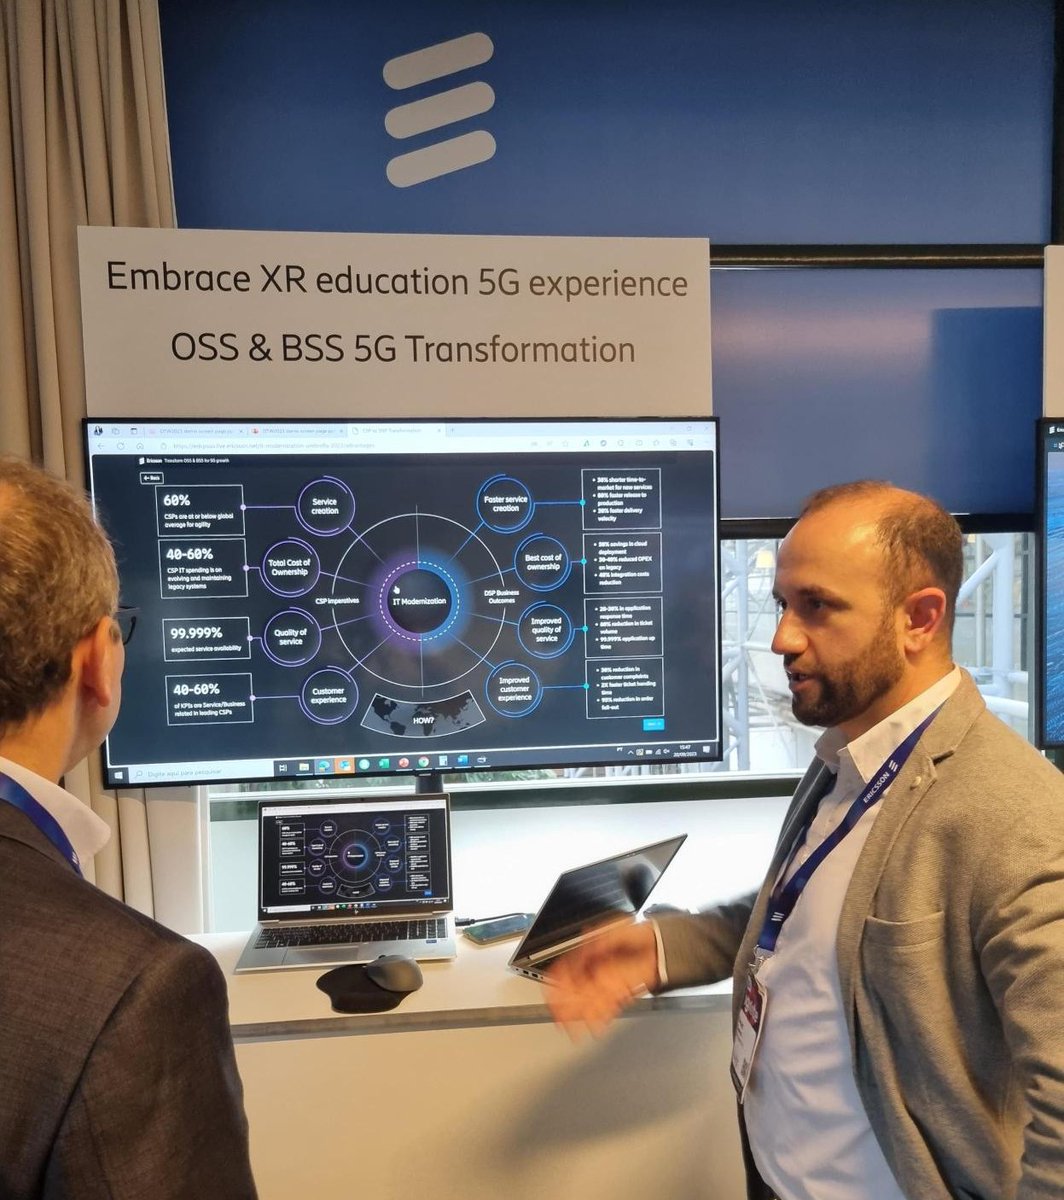 🛡️💪 OSS and BSS are the unsung heroes of telecoms systems. Transform them to reap the benefits of #5G, #EdgeComputing and #cloud.  

Our expert Emad will tell you the rest in Room 17 on level 1. #EricssonAtDTW23 #telecoms #DTW23